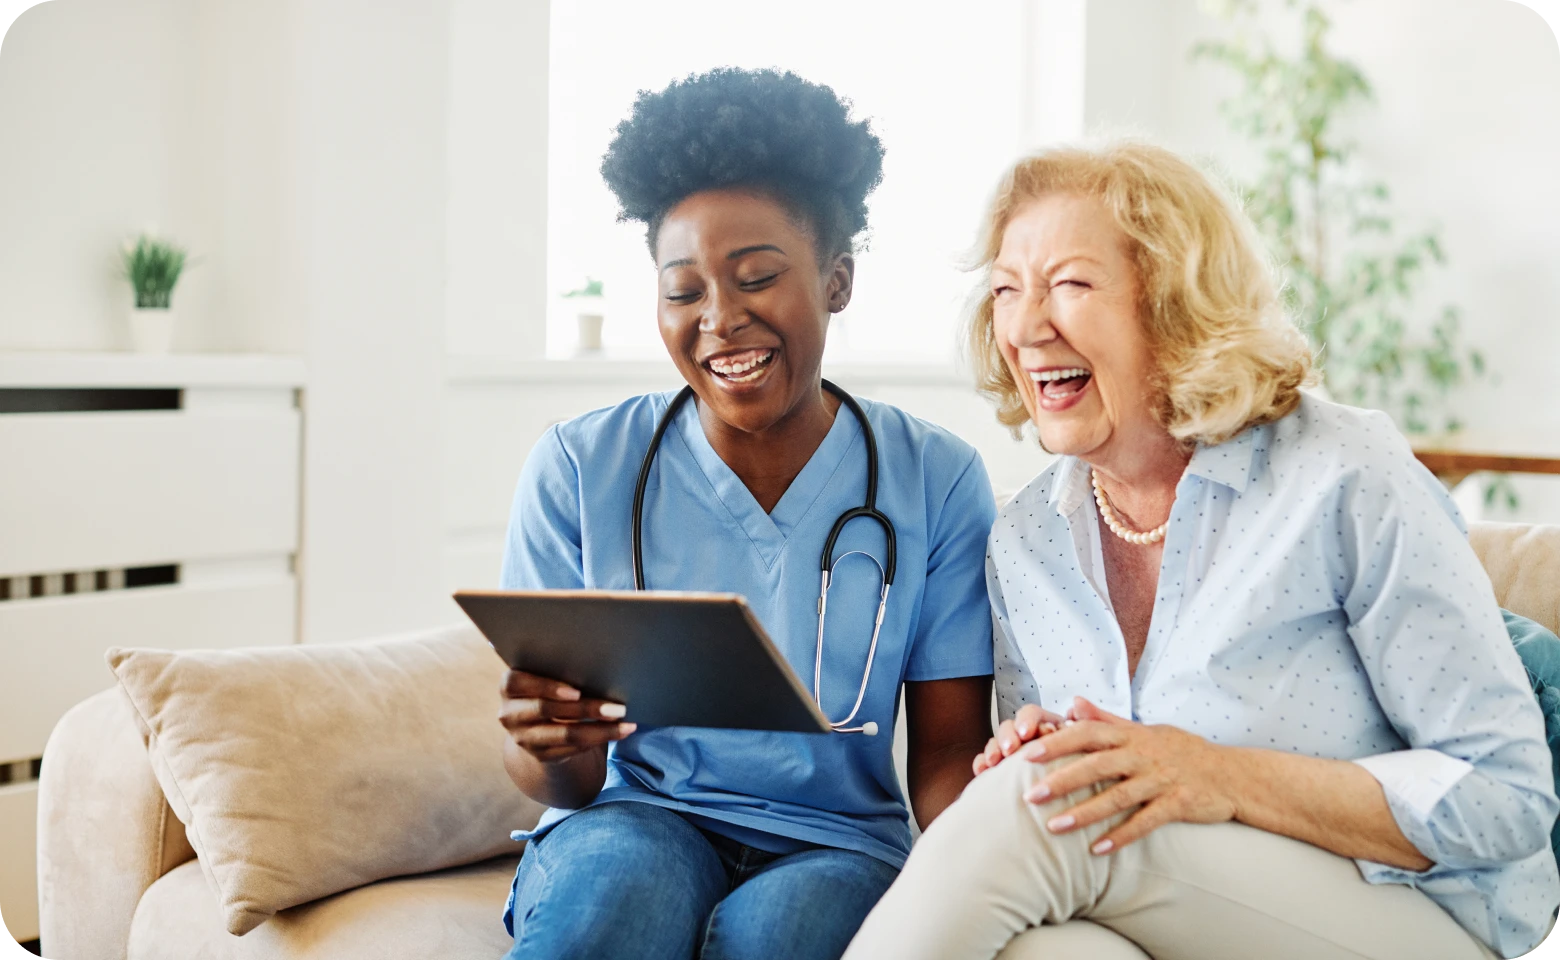 Nurse-with-ipad-and-elderly-woman-smiling